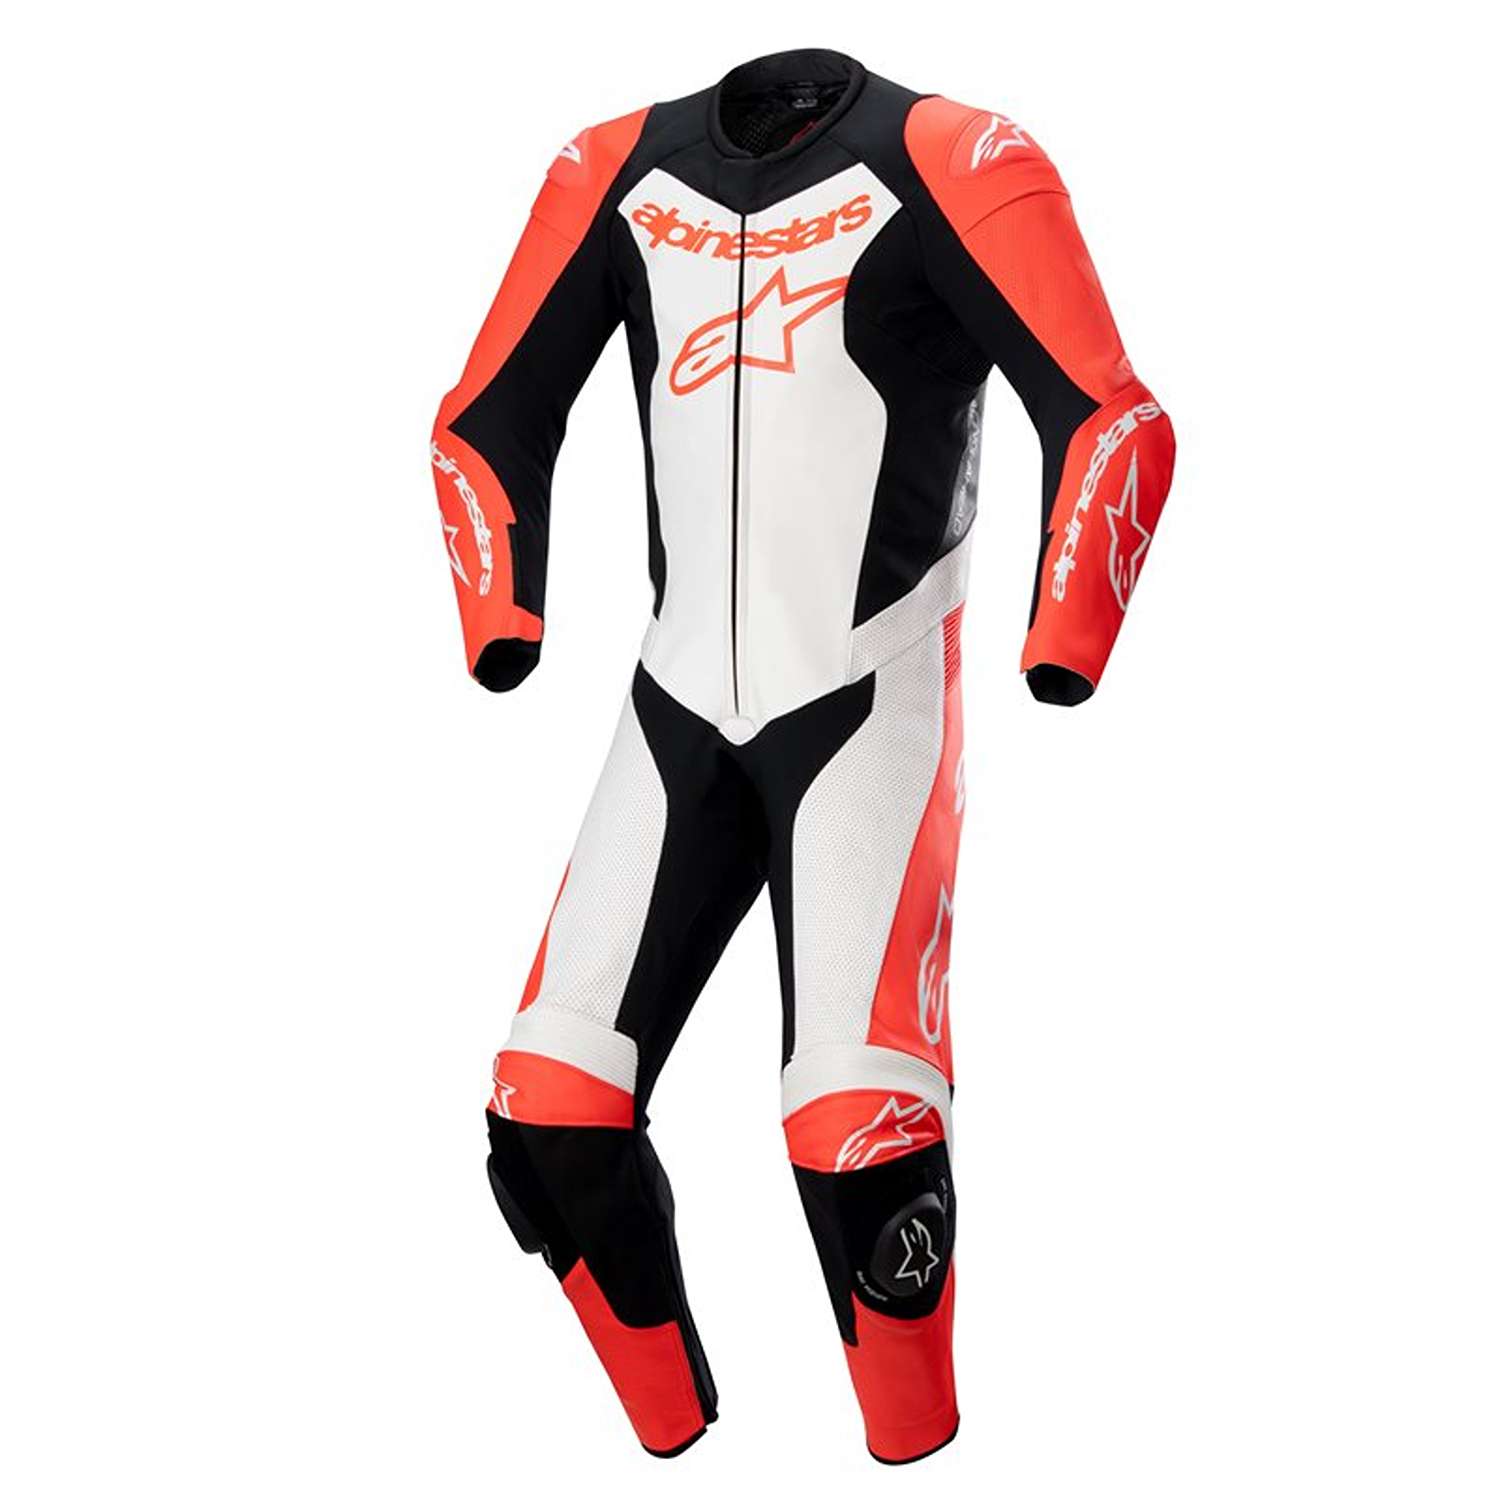 Image of Alpinestars Gp Force Lurv 1Pc Leather Suit Red Fluo White Black Size 56 ID 8059347340395